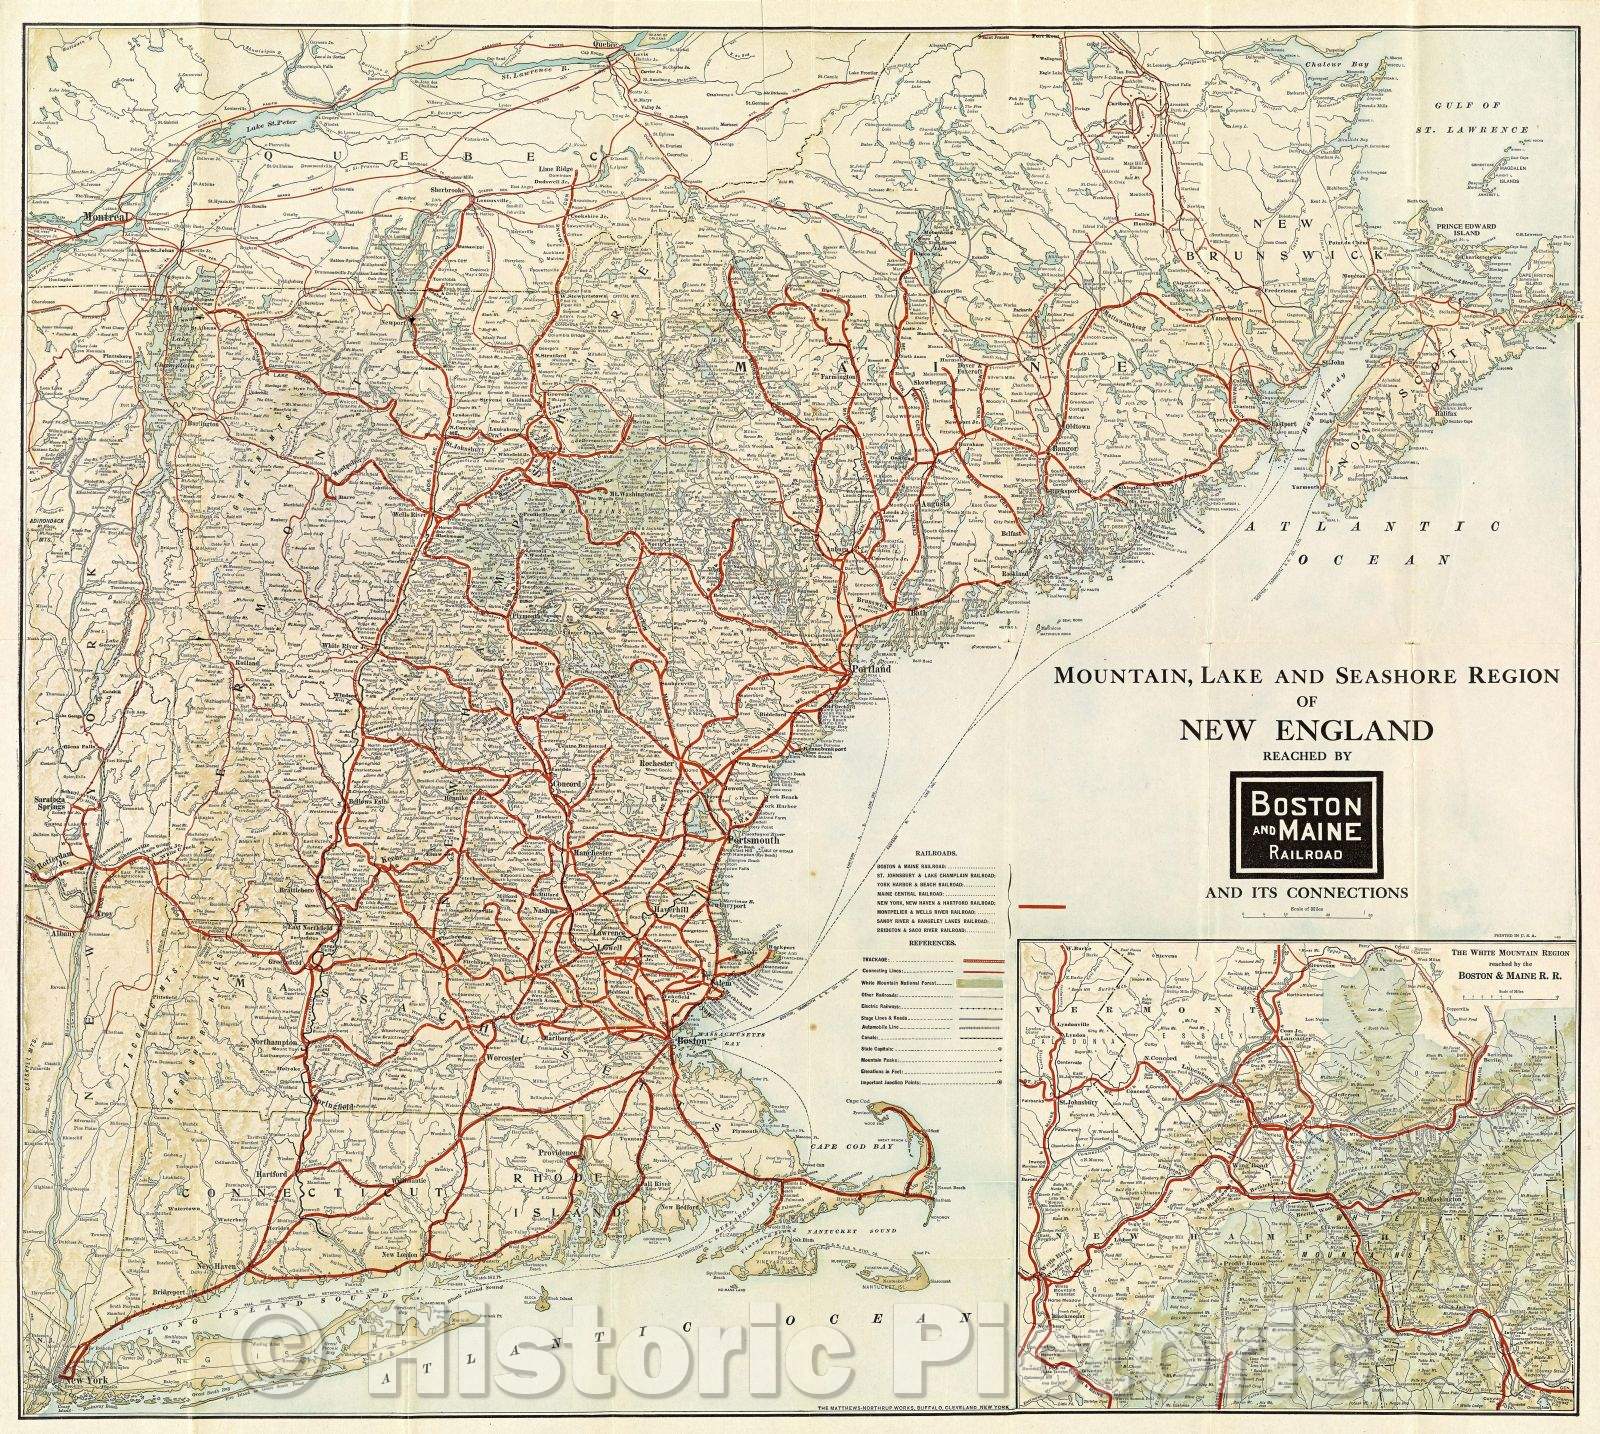 Historic Map : Mountain, Lake and Seashore Region of New England reached by Boston and Maine Railroad and its connections, 1923 , Vintage Wall Art